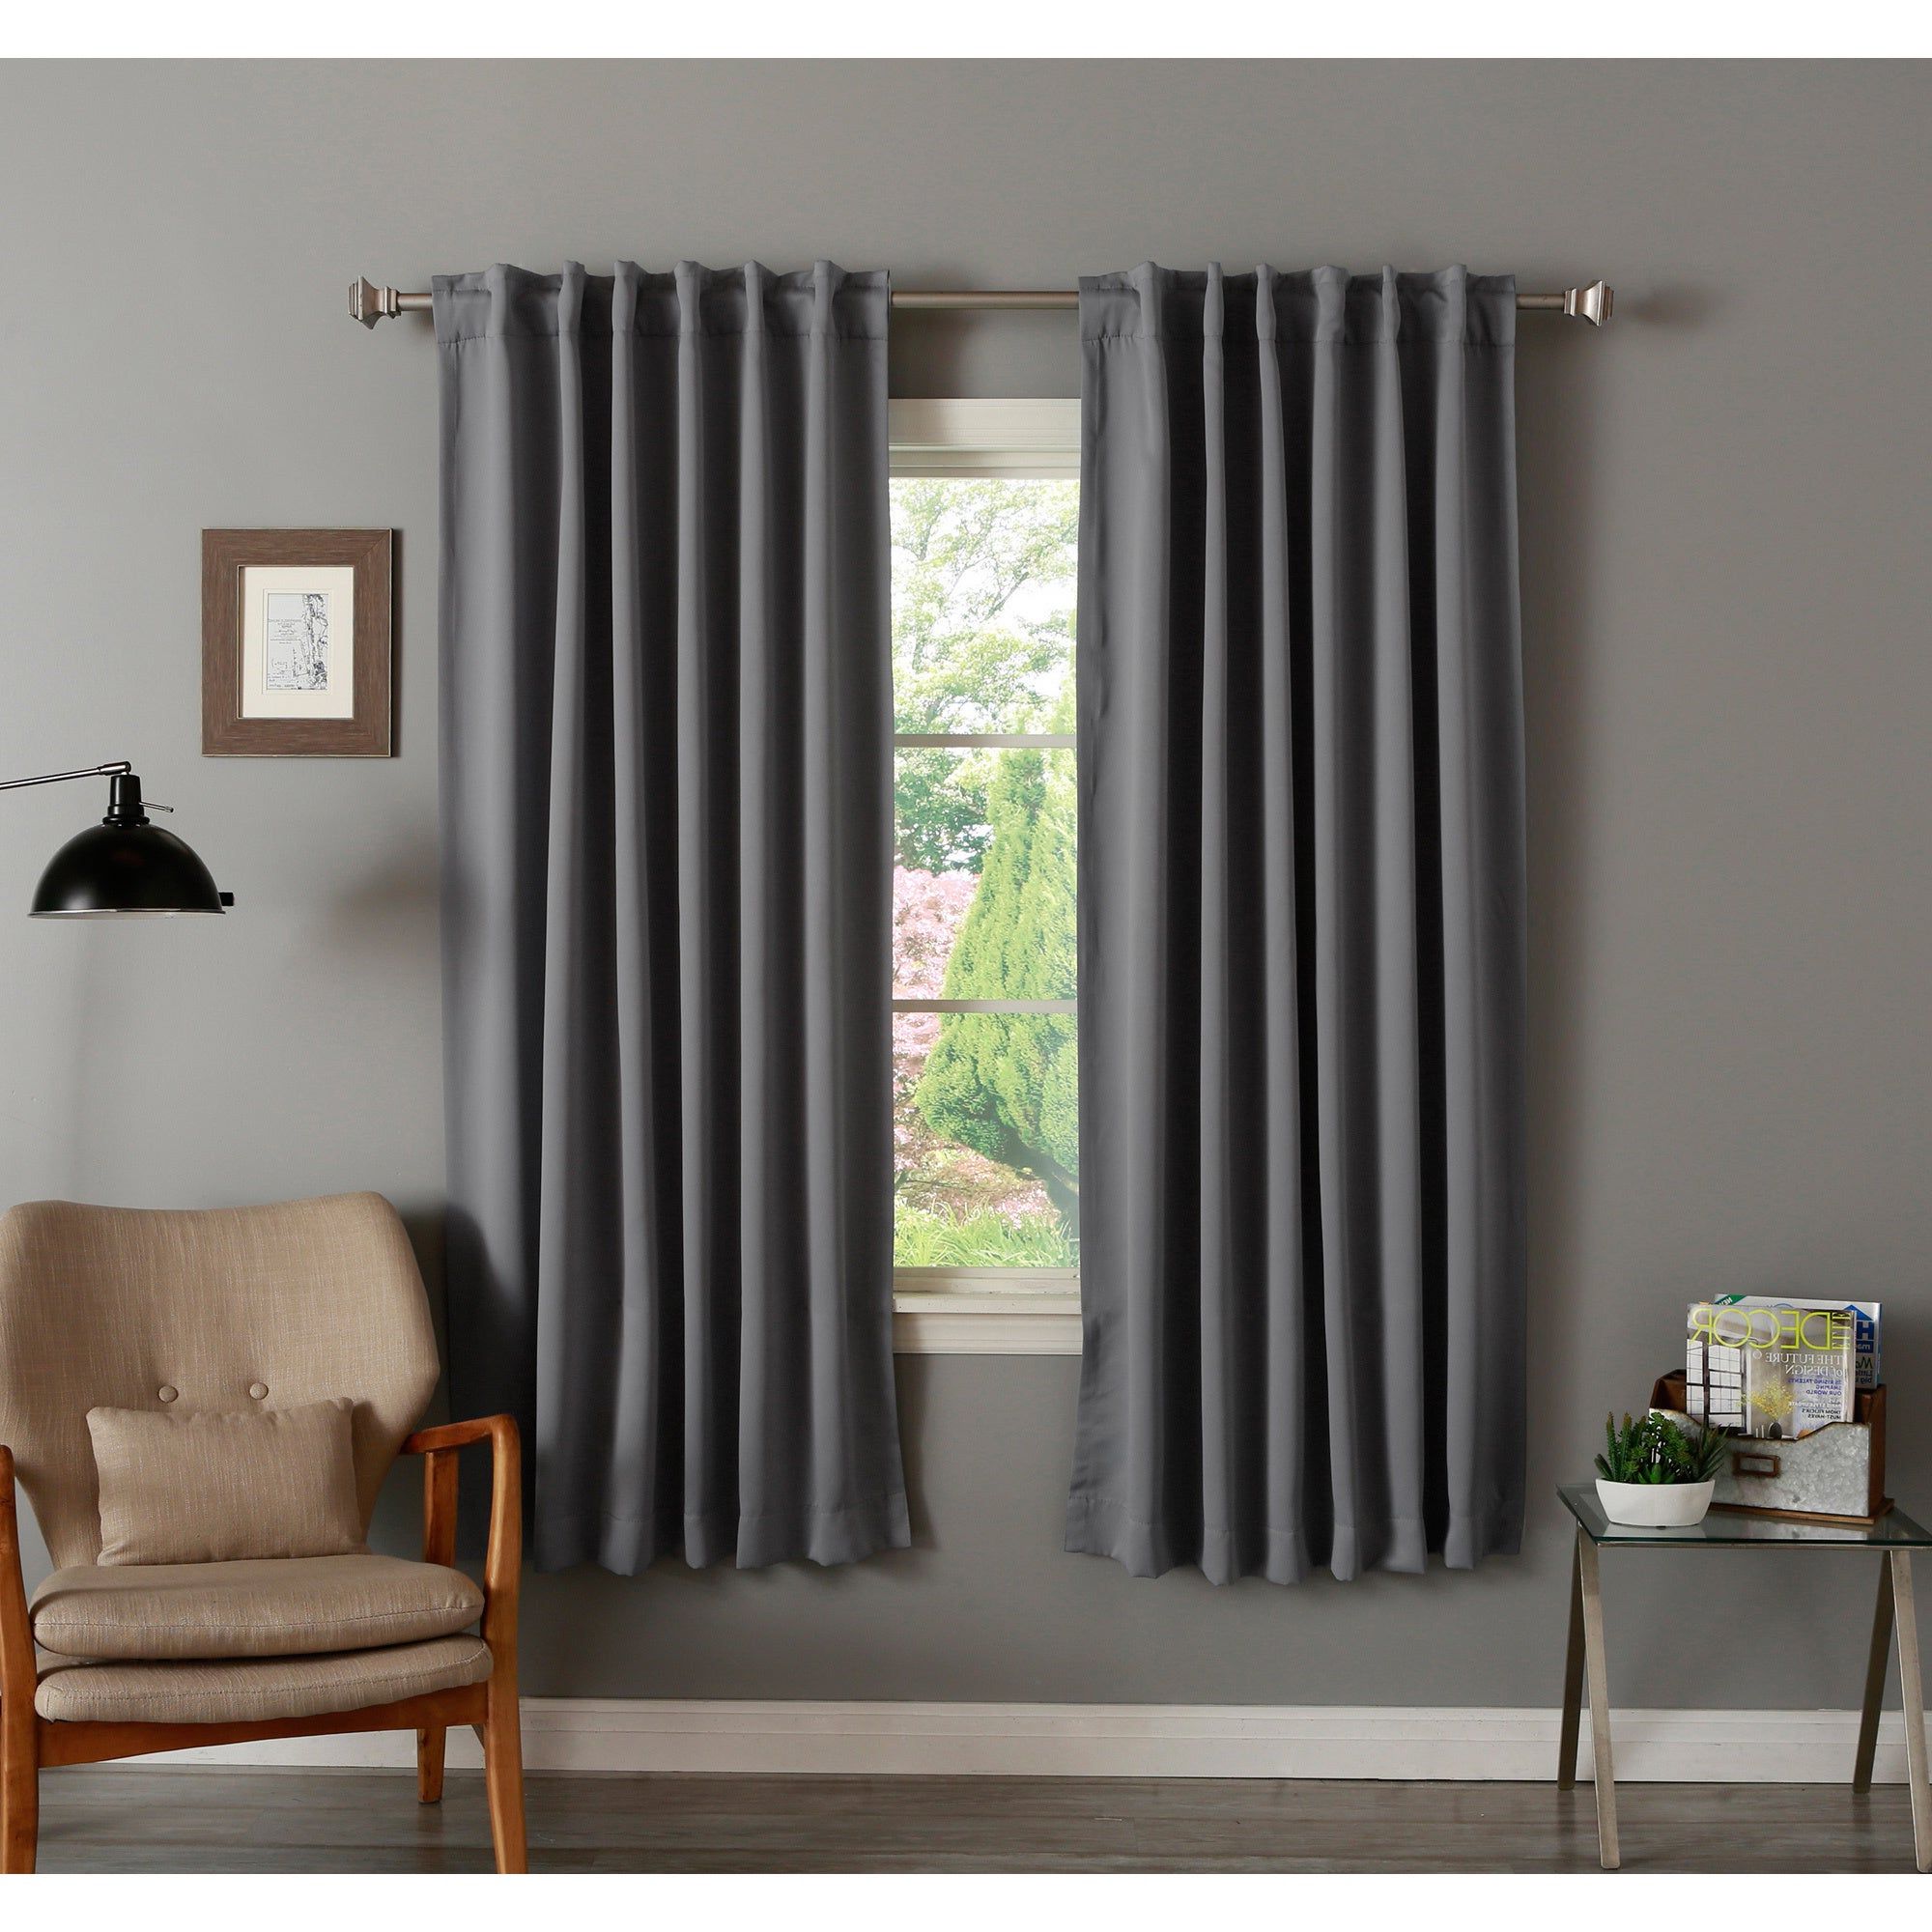 Thermal Insulated Blackout Curtain Pairs With Regard To Widely Used Aurora Home Insulated 72 Inch Thermal Blackout Curtain Panel Pair – 52 X  (View 8 of 20)